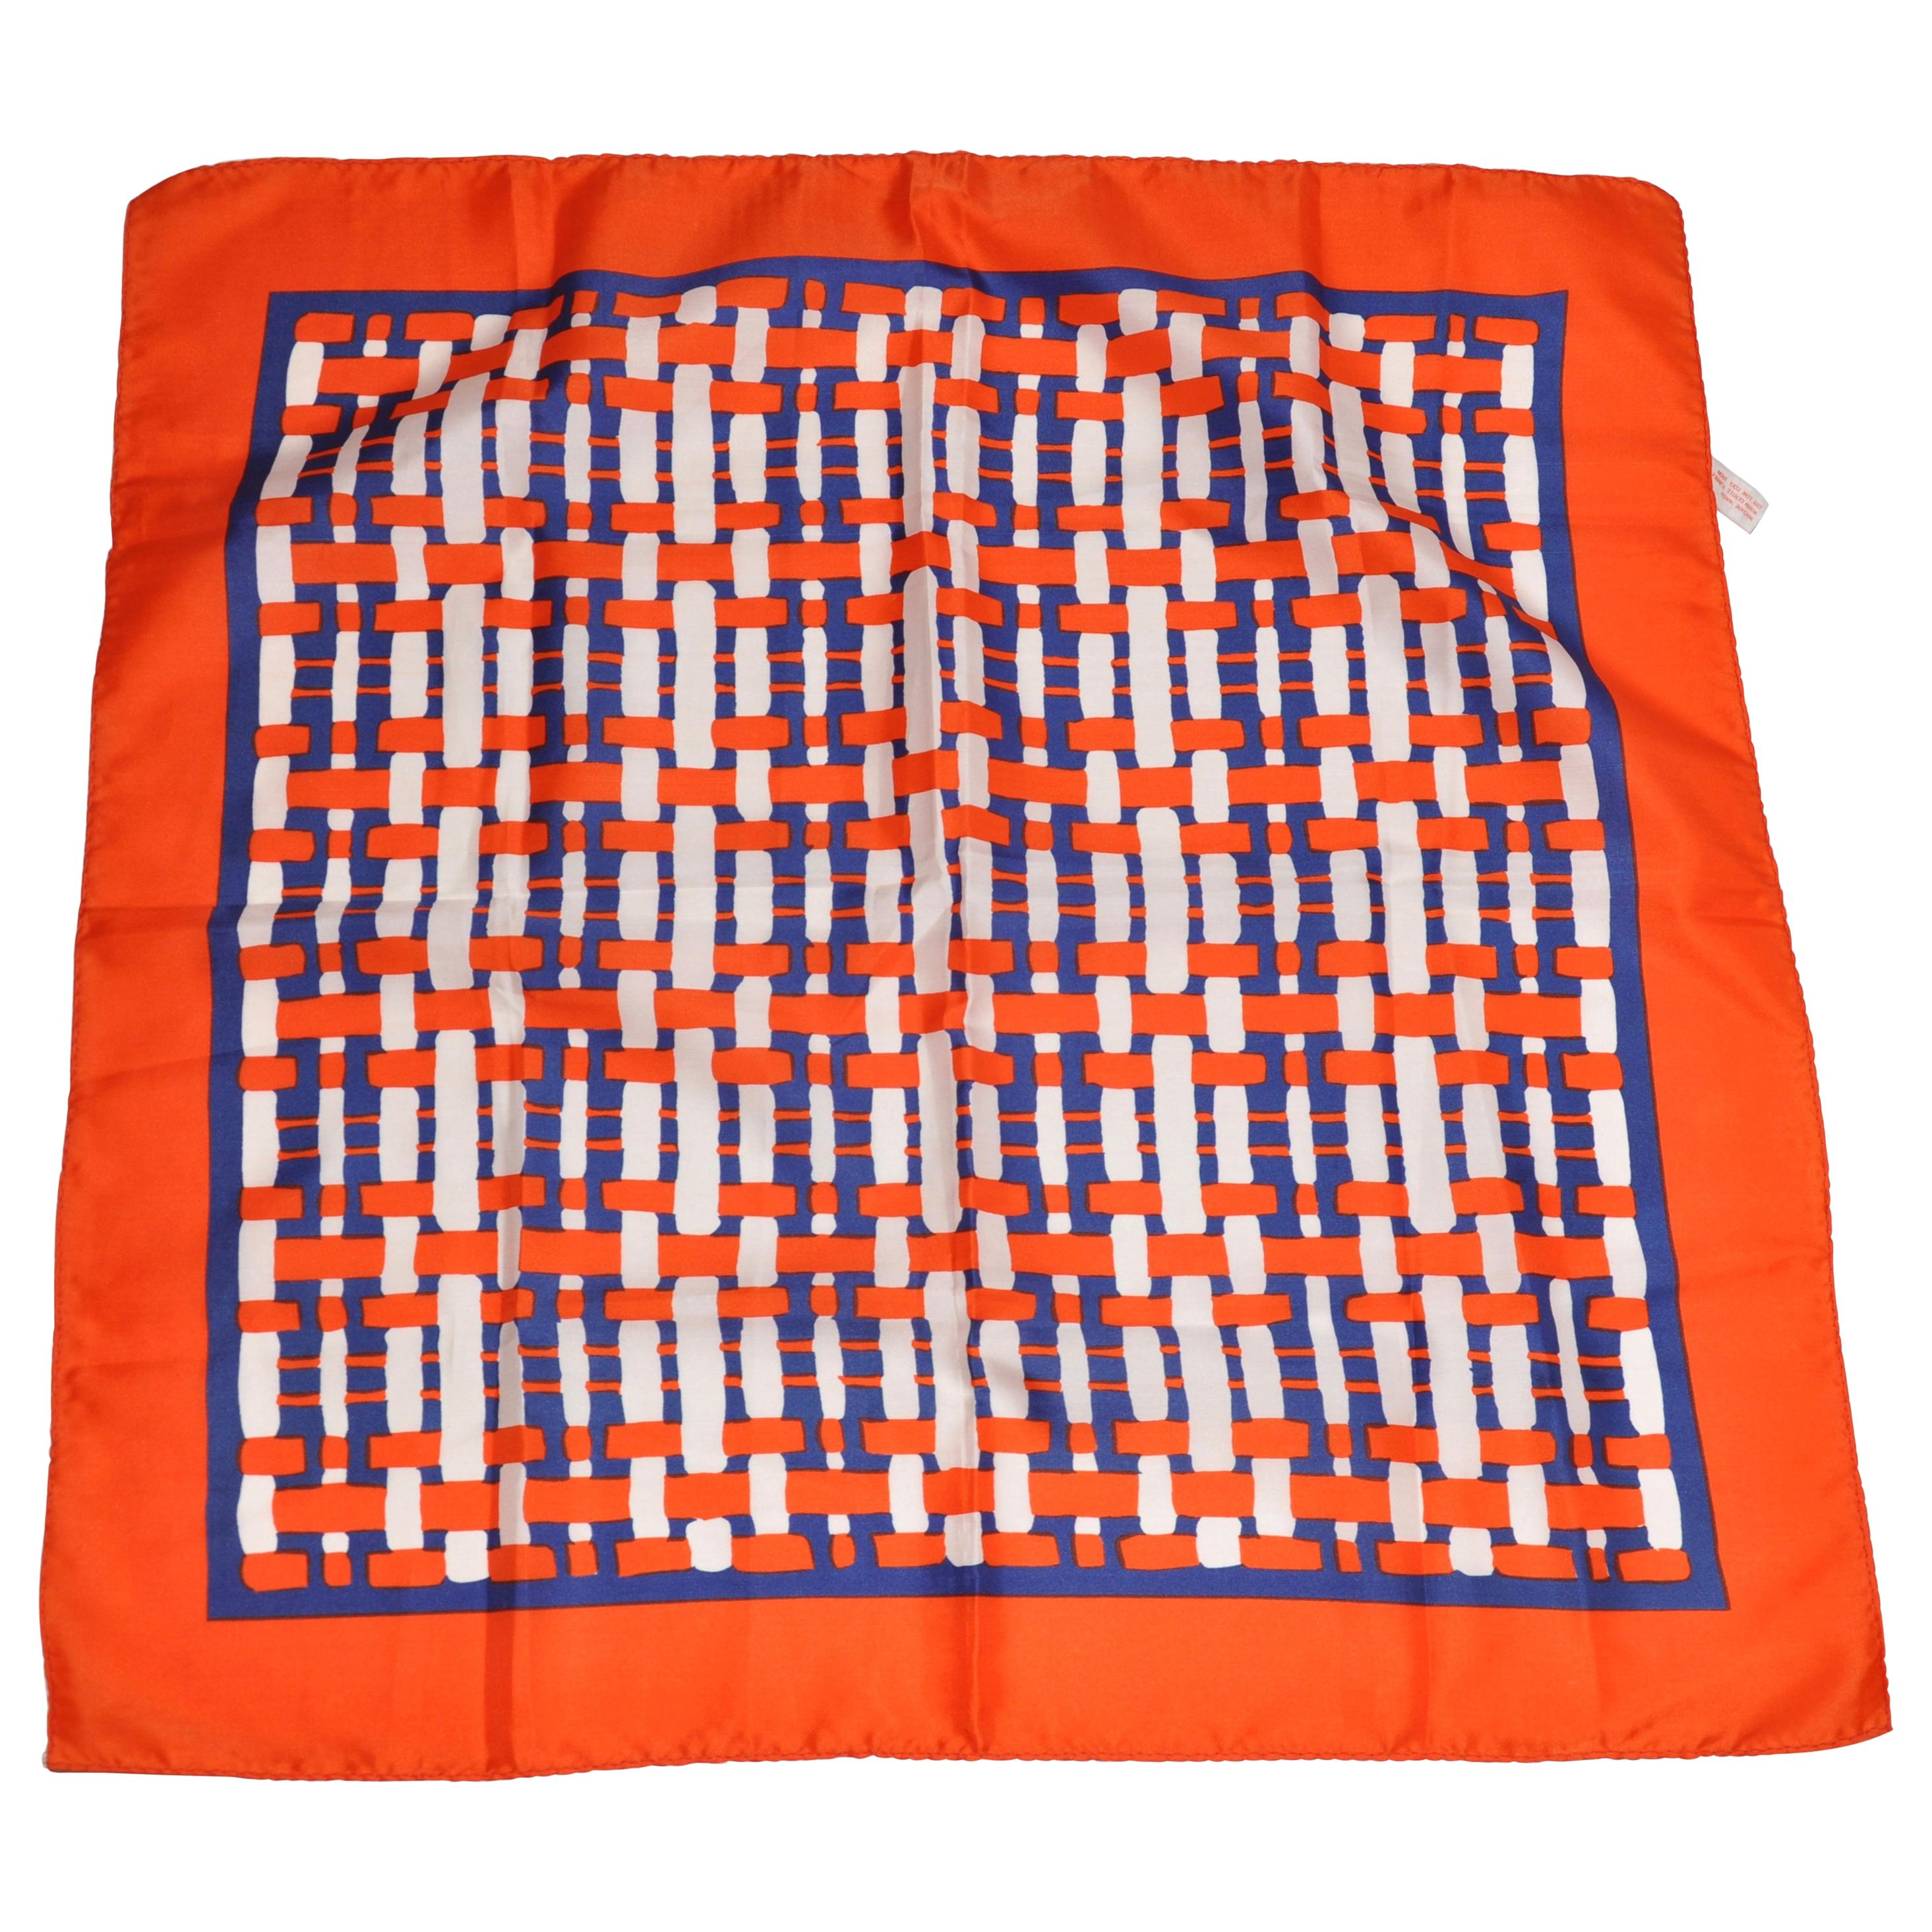 Bold Tangerine Borders With Center Plaid Checker Scarf For Sale